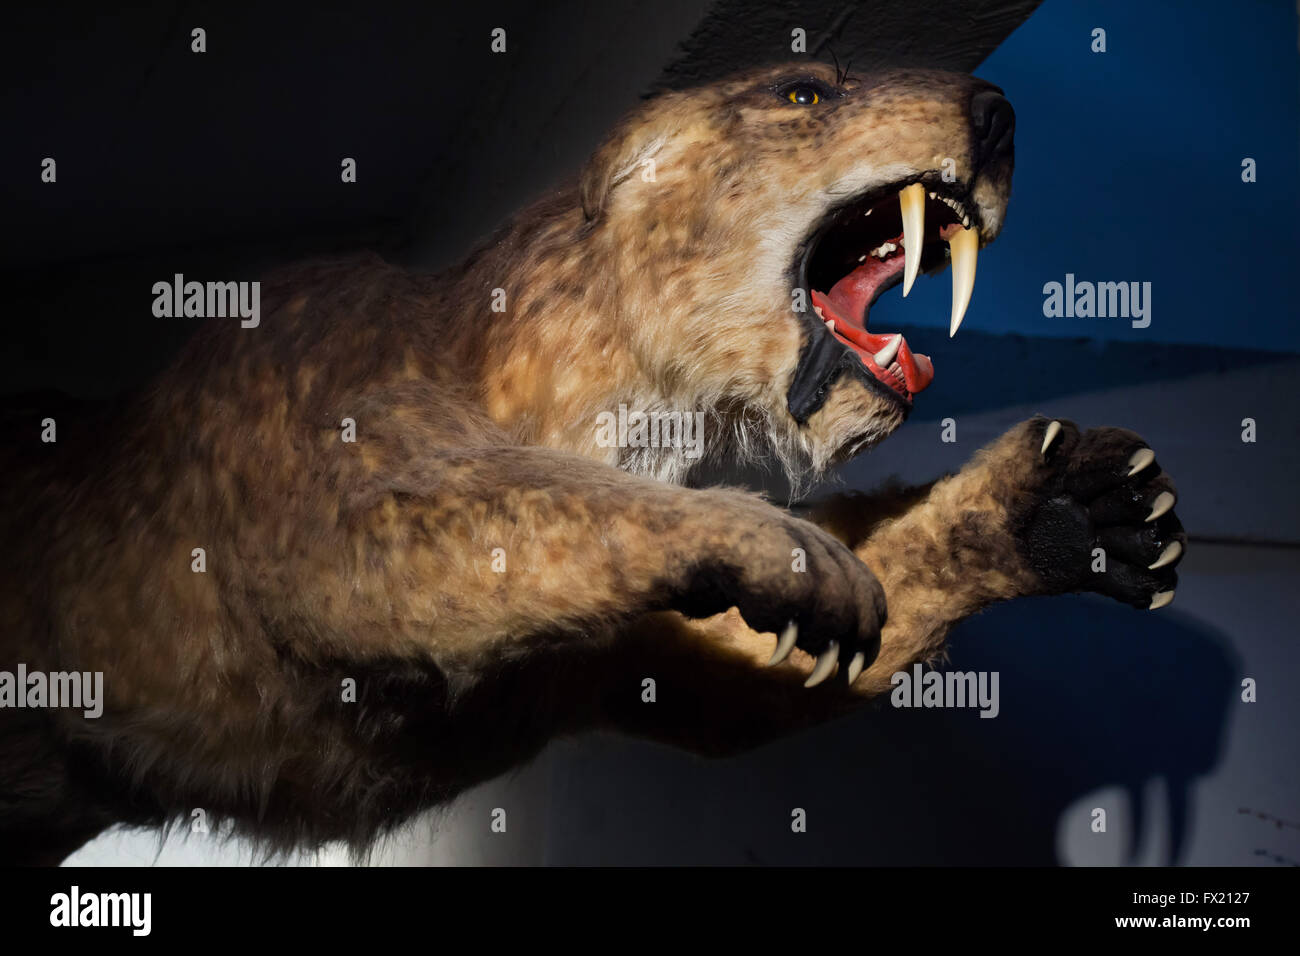 Saber-toothed tiger (Smilodon populator) displayed as a life size model at Budapest Zoo in Budapest, Hungary. Stock Photo